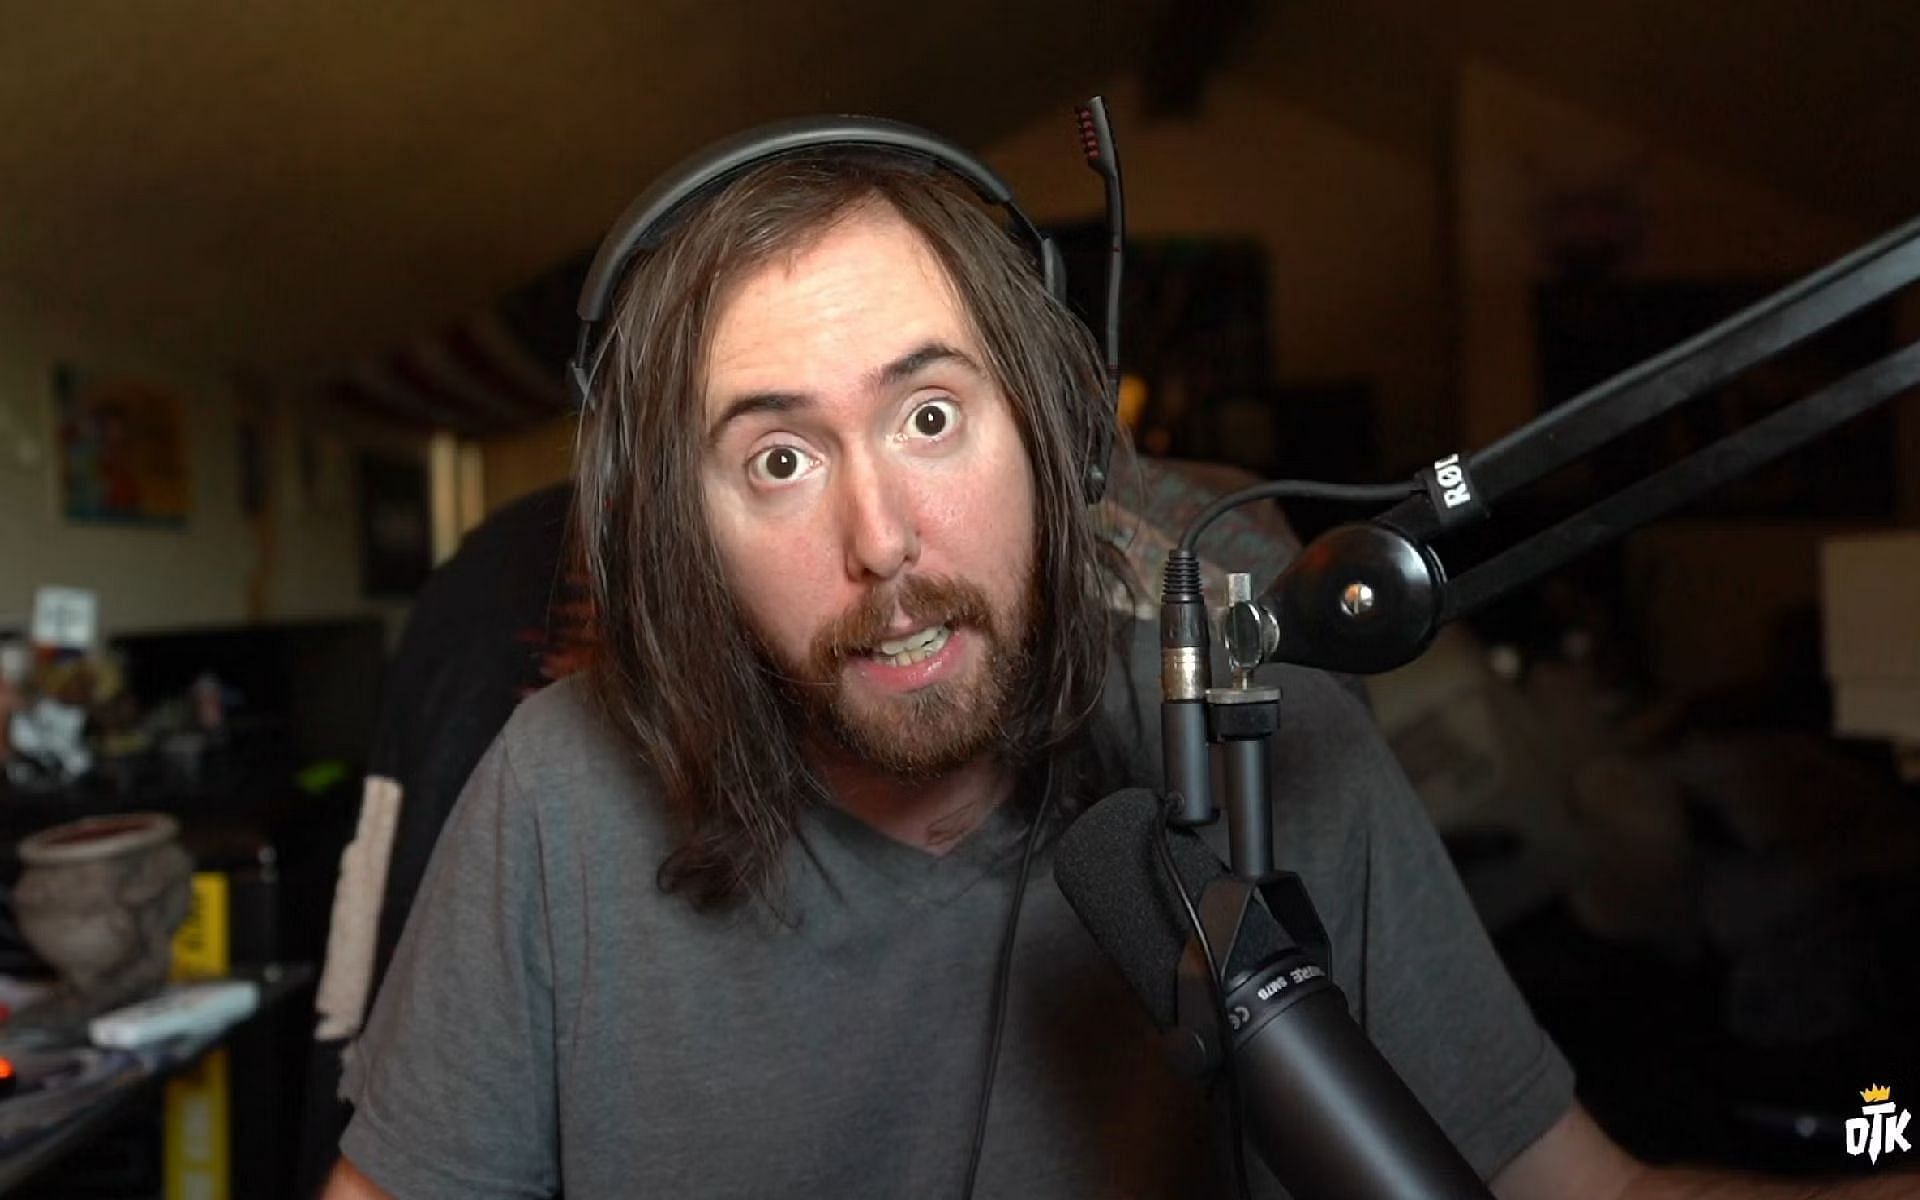 Asmongold responds to those claiming new Twitch update promotes &quot;degeneracy&quot; (Image via Asmongold/Twitch)